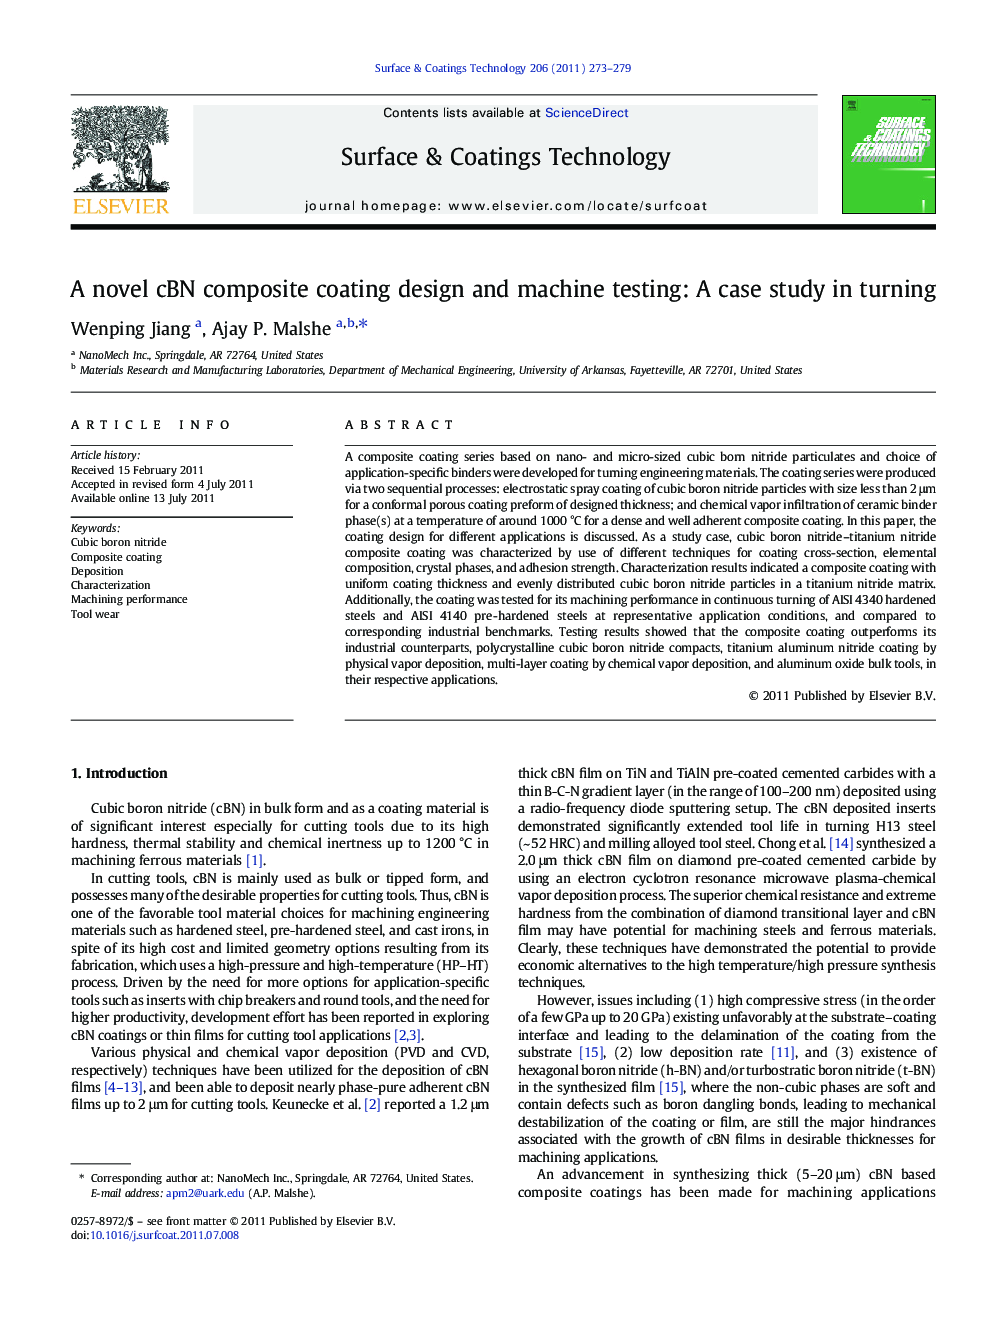 A novel cBN composite coating design and machine testing: A case study in turning